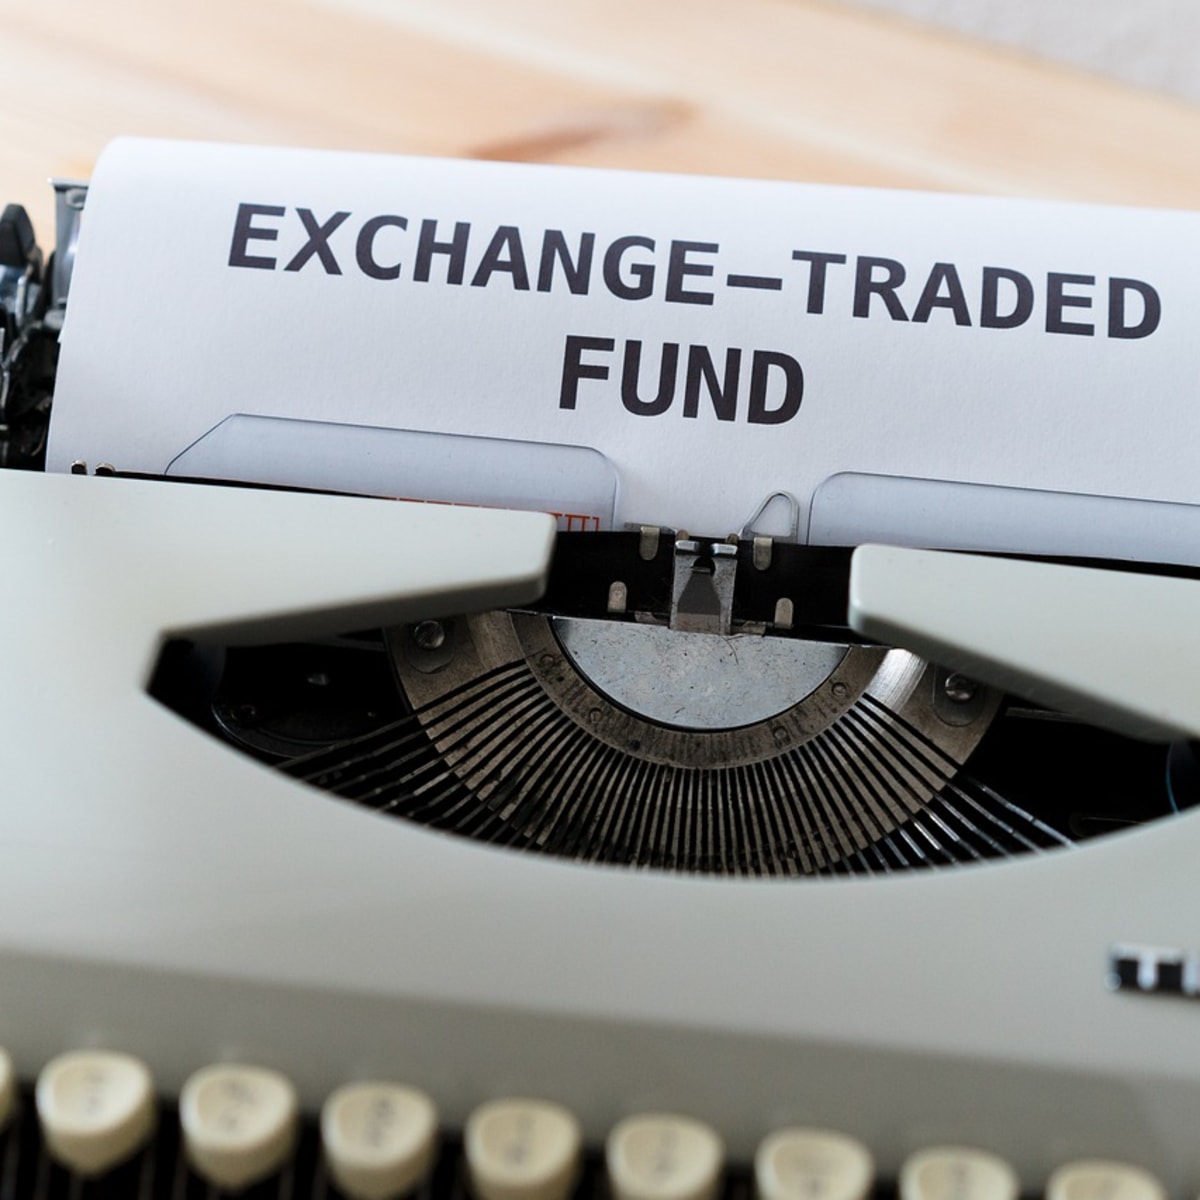 FZROX vs. VTI: Does Fidelity's 0% Fee Total Market Fund Beat Vanguard? -  ETF Focus on TheStreet: ETF research and Trade Ideas